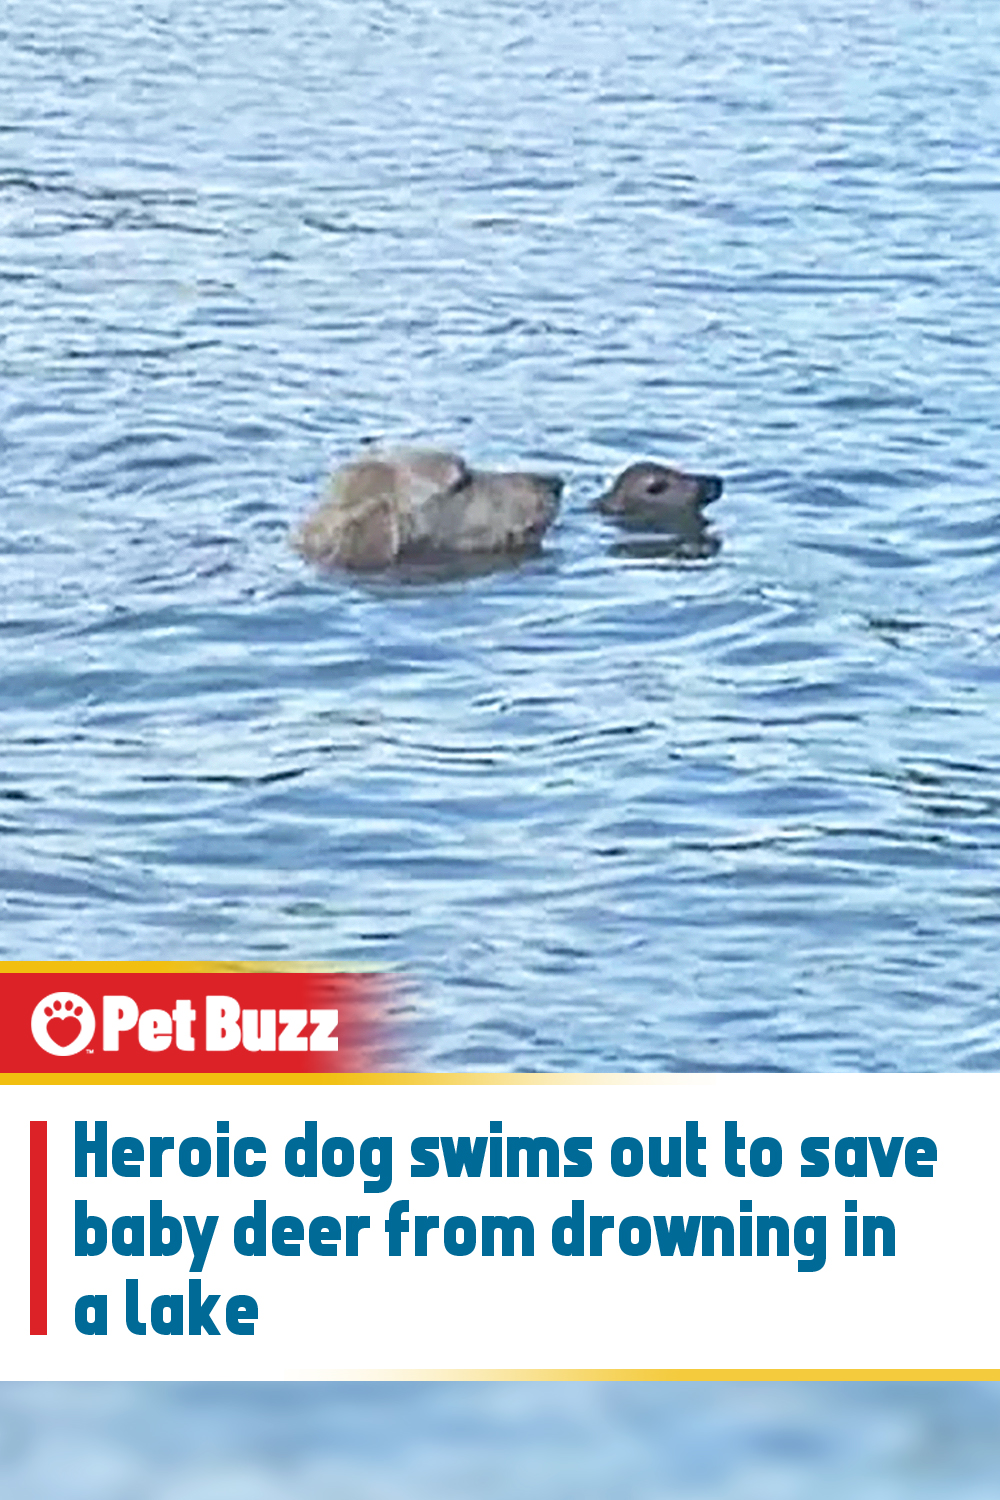 Heroic dog swims out to save baby deer from drowning in a lake